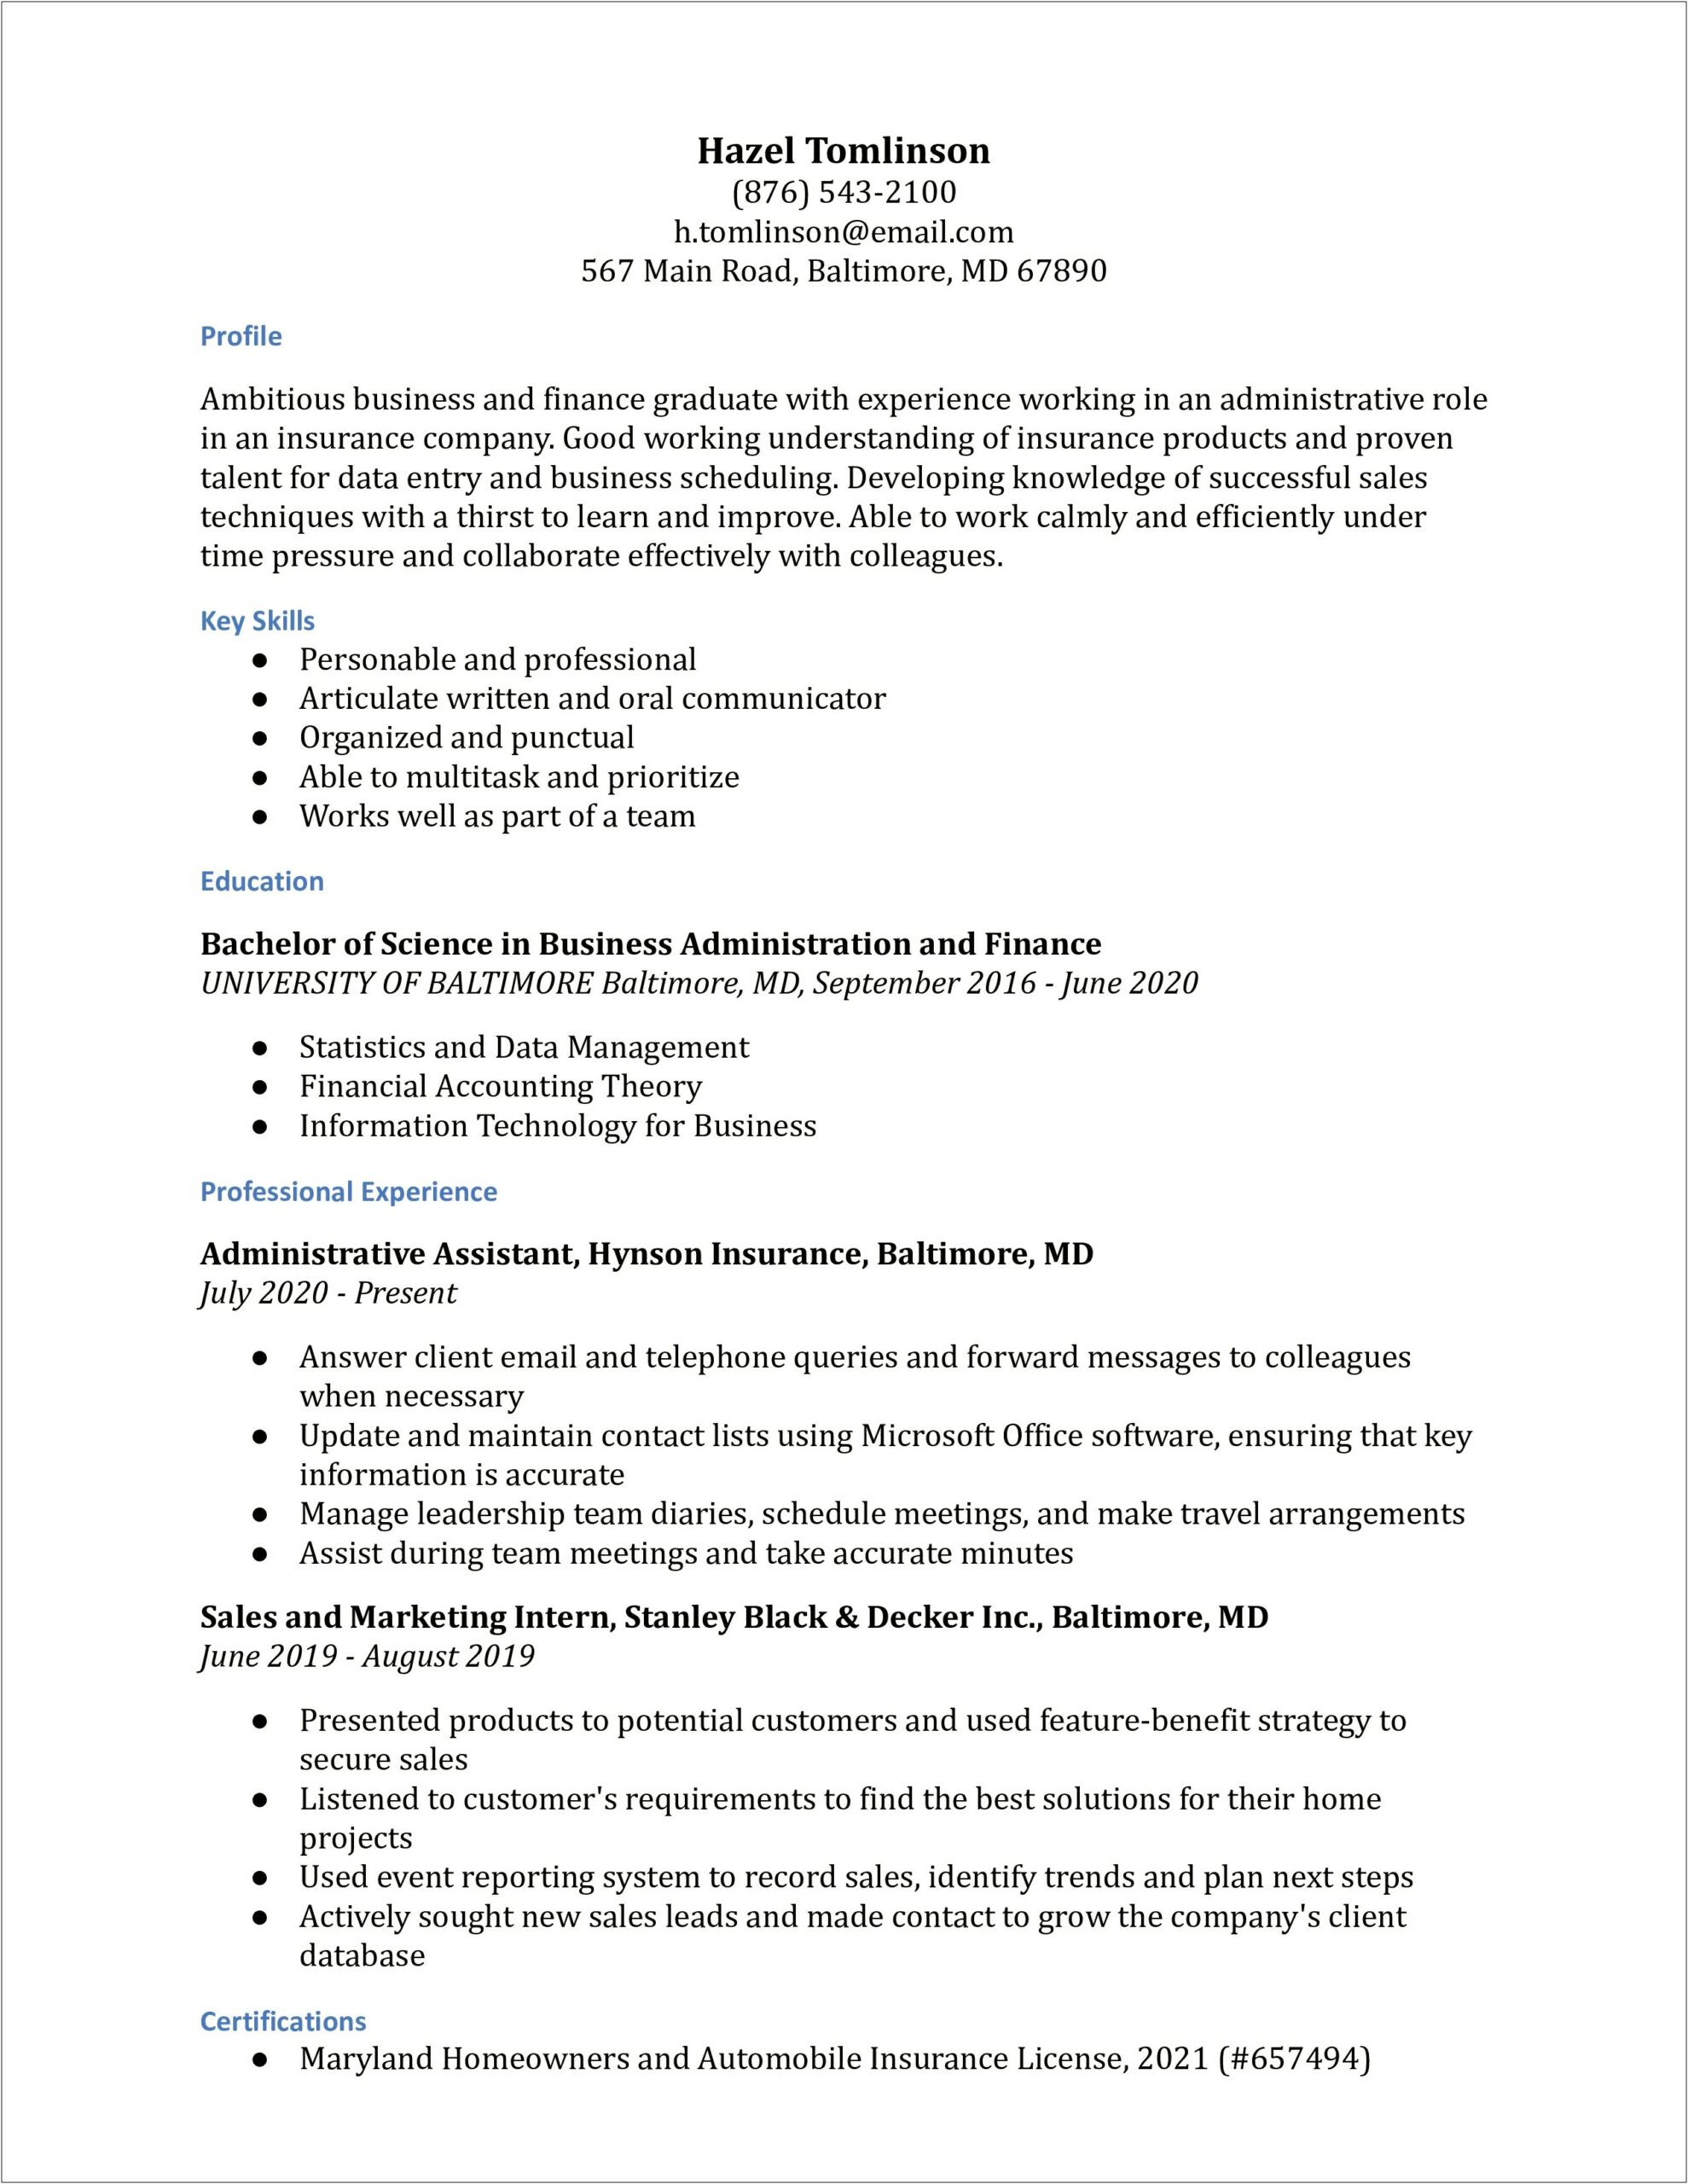 Resume For Property And Casualty Insurance Project Manager